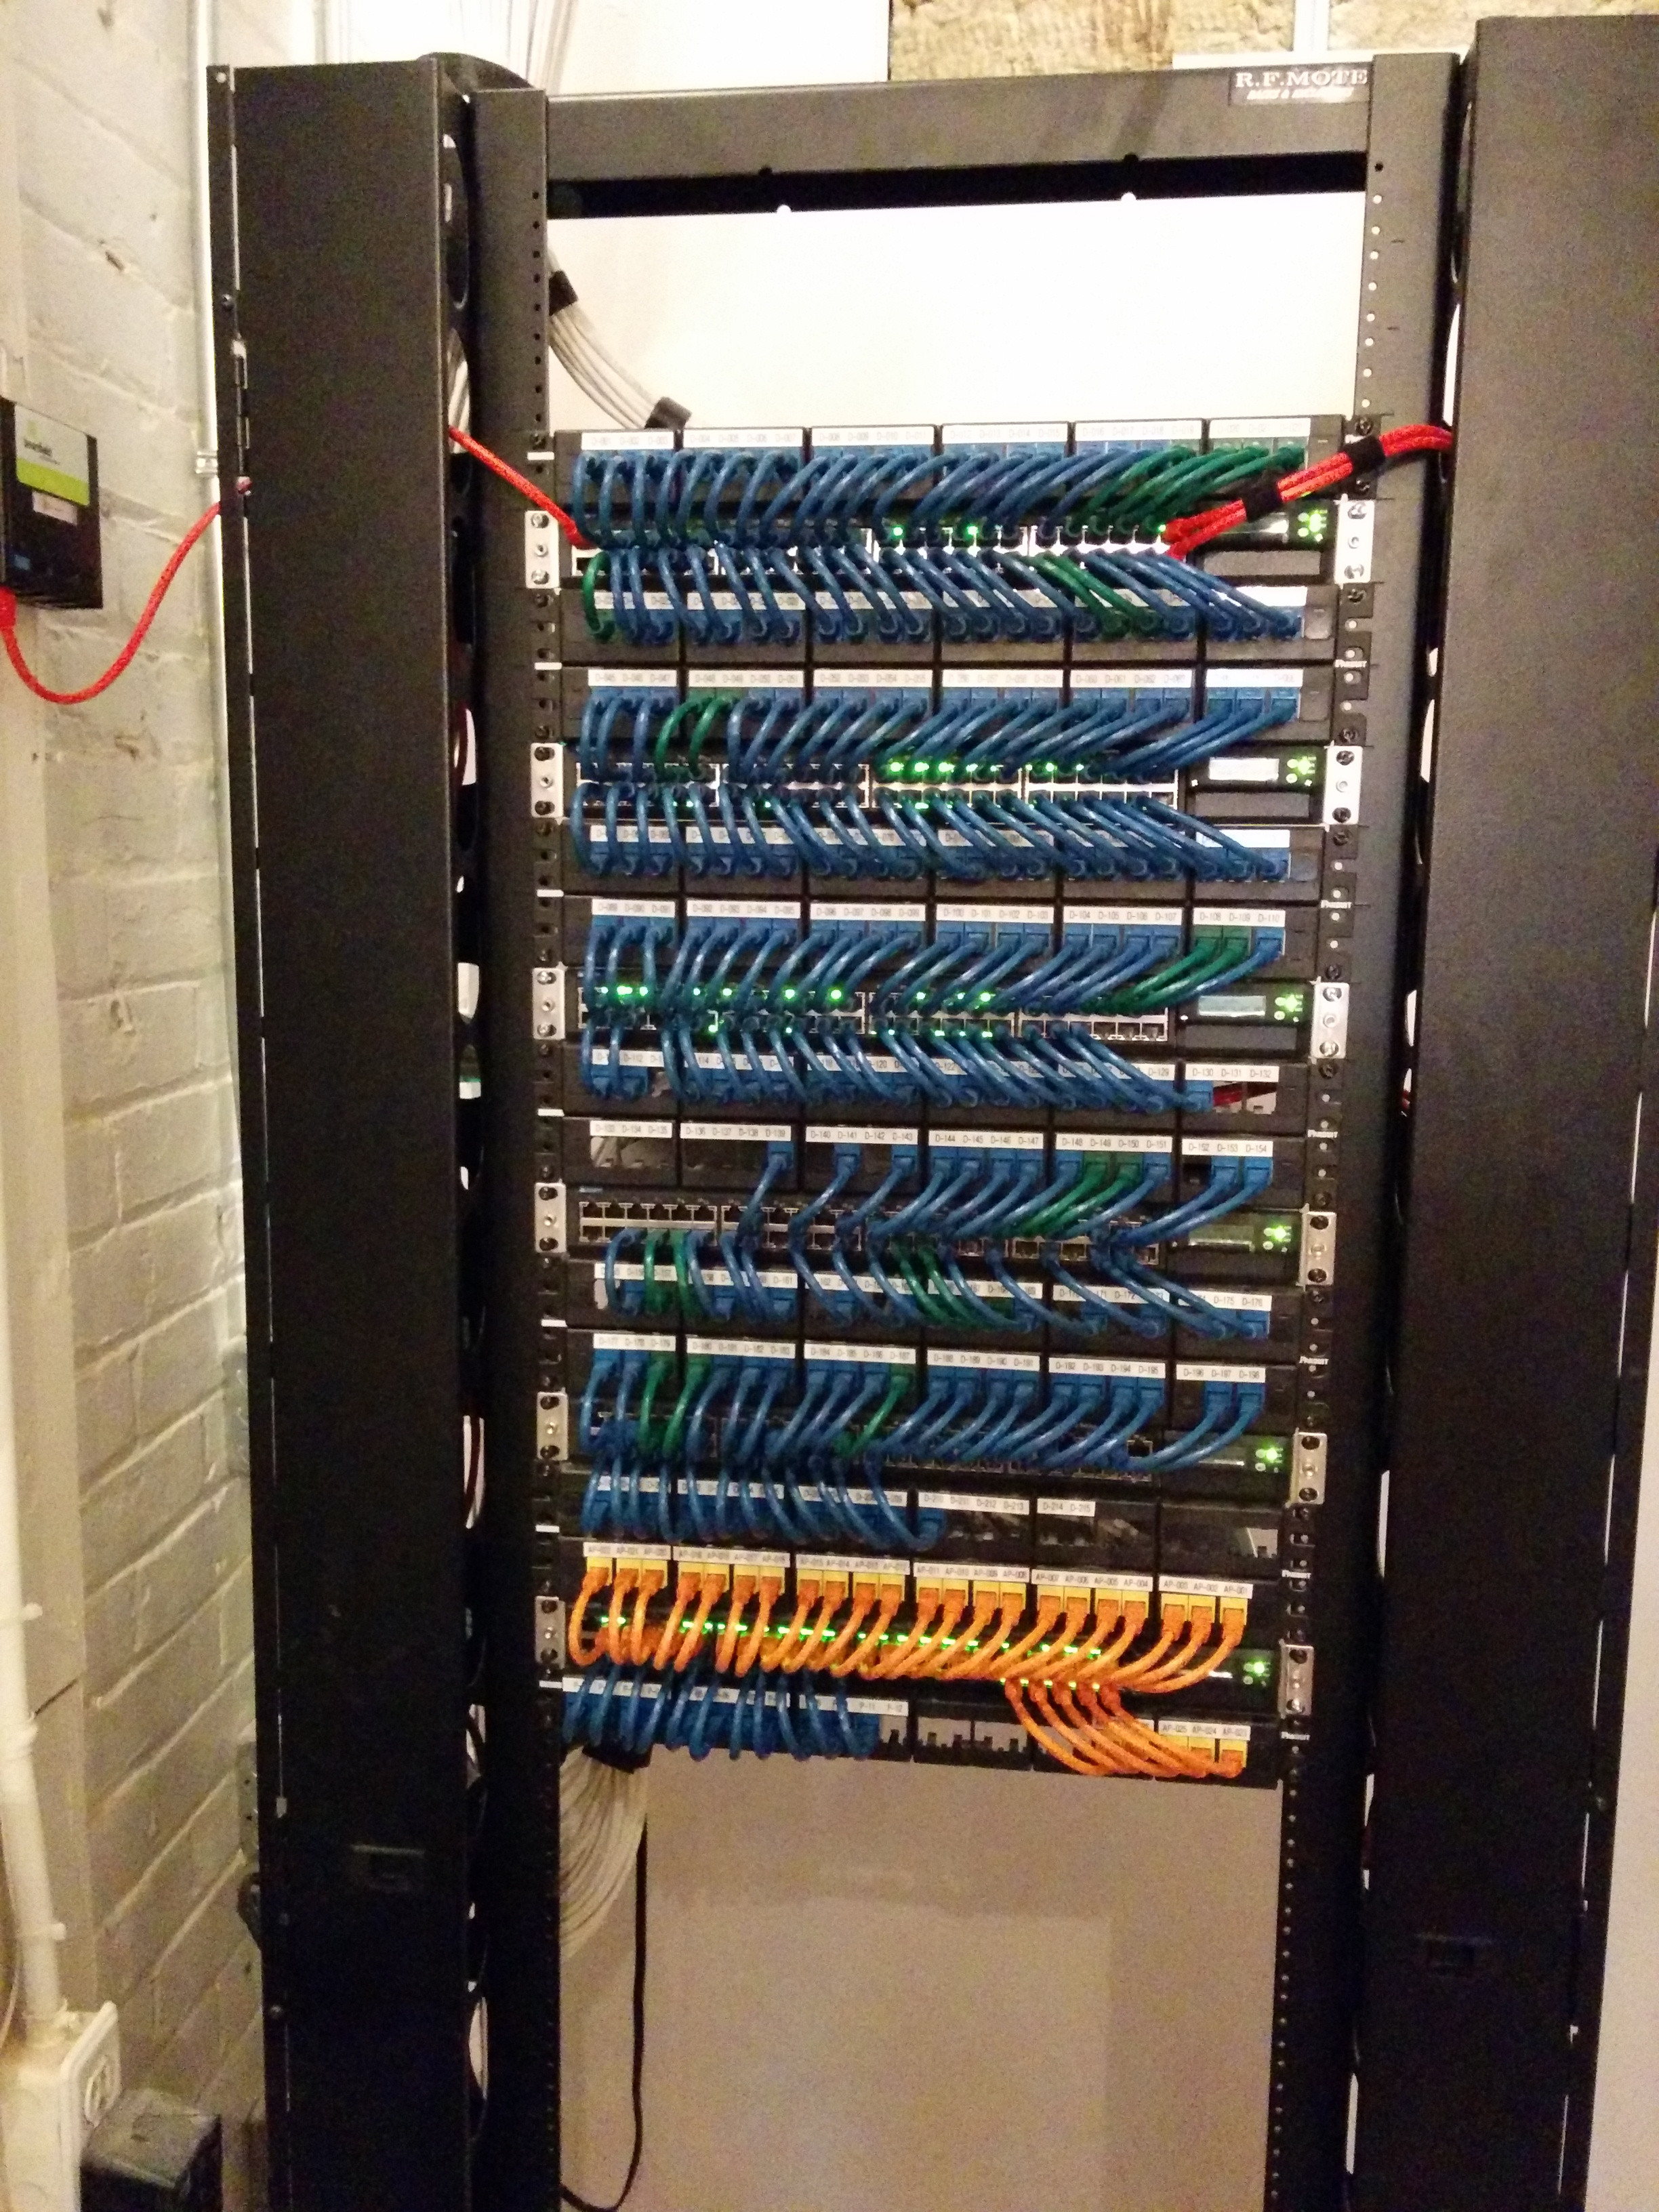 Great job making a clean network install. Blue and Orange Ethernet ...